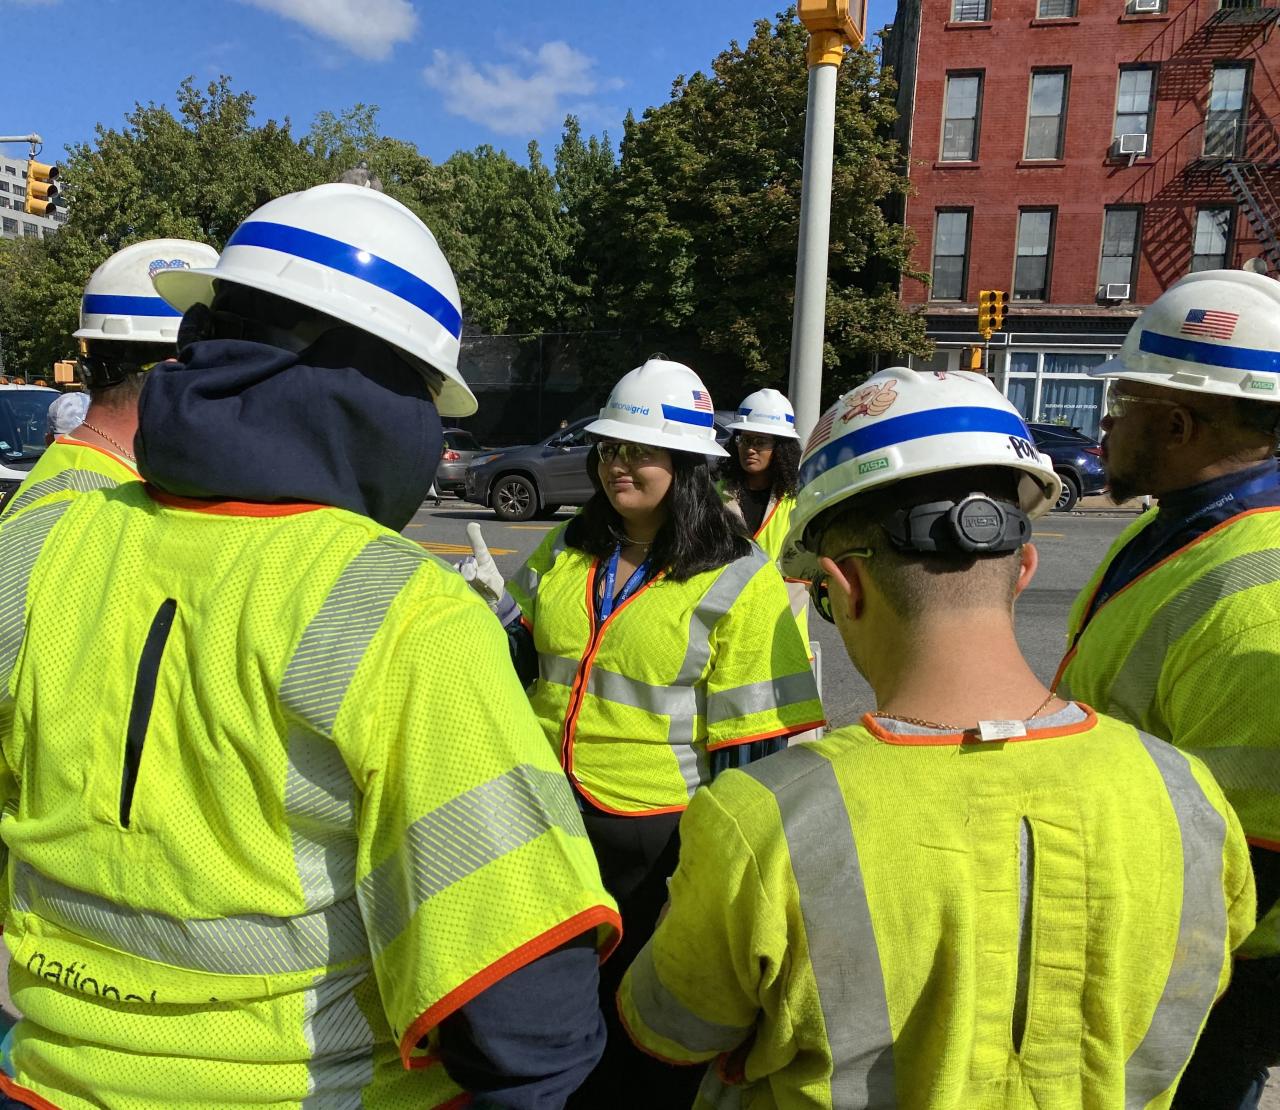 Girl stands on street corner with staff from National Grid in yellow safety vests.